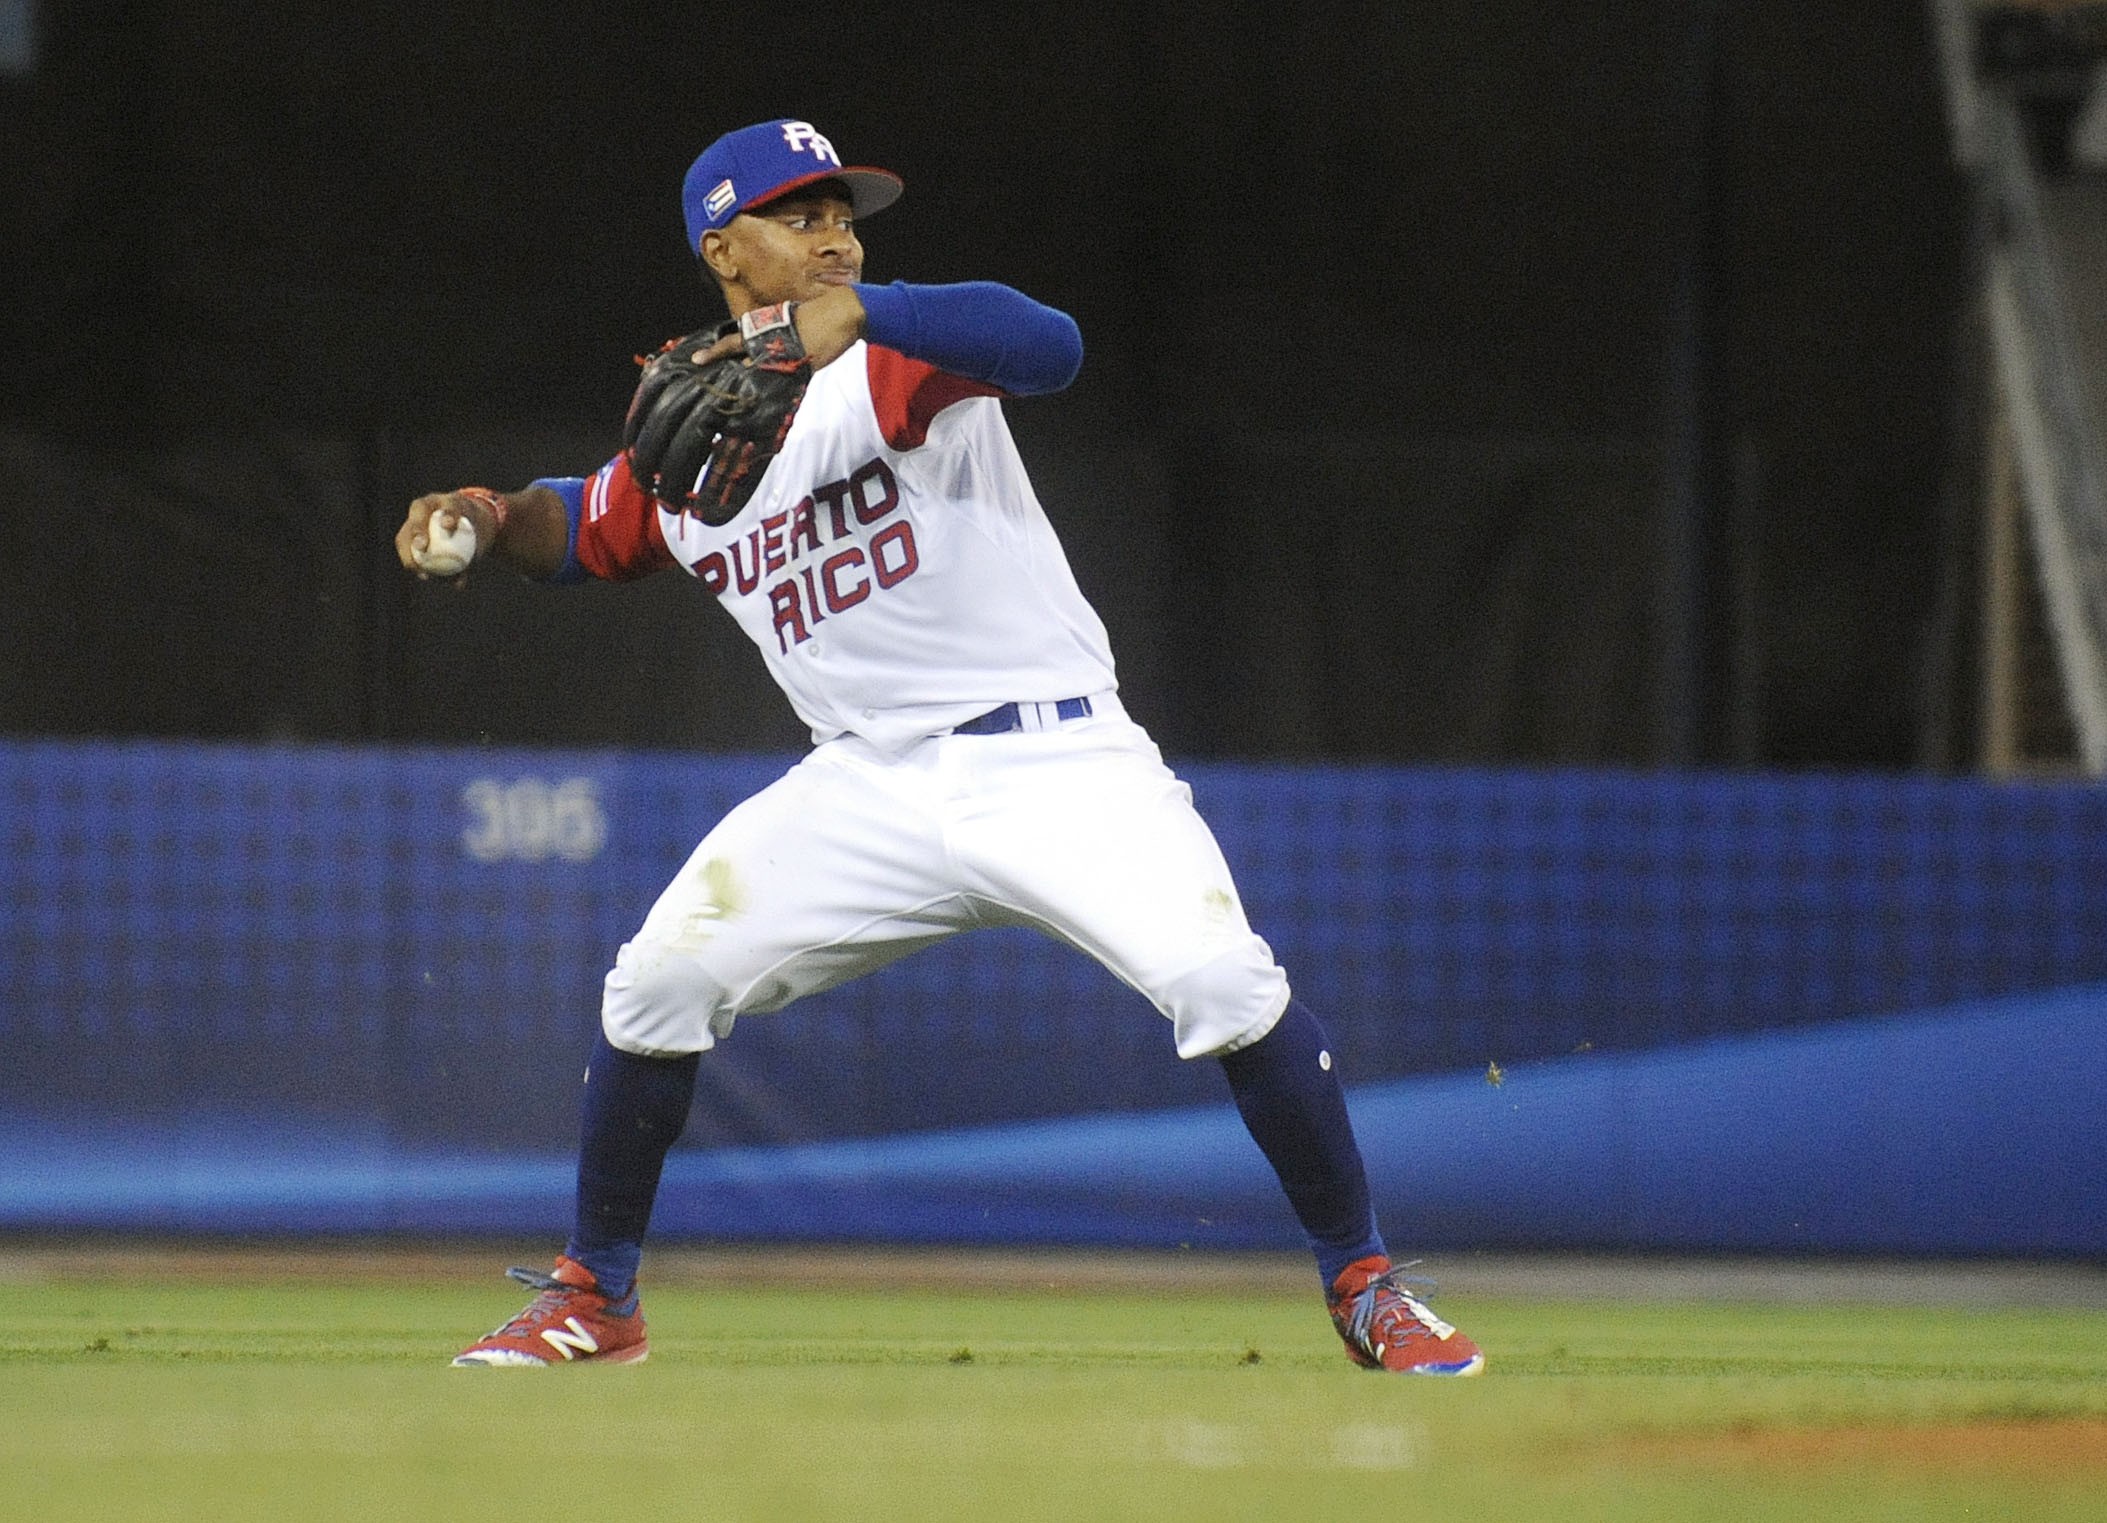 Cleveland Indians: Francisco Lindor honored for play in WBC